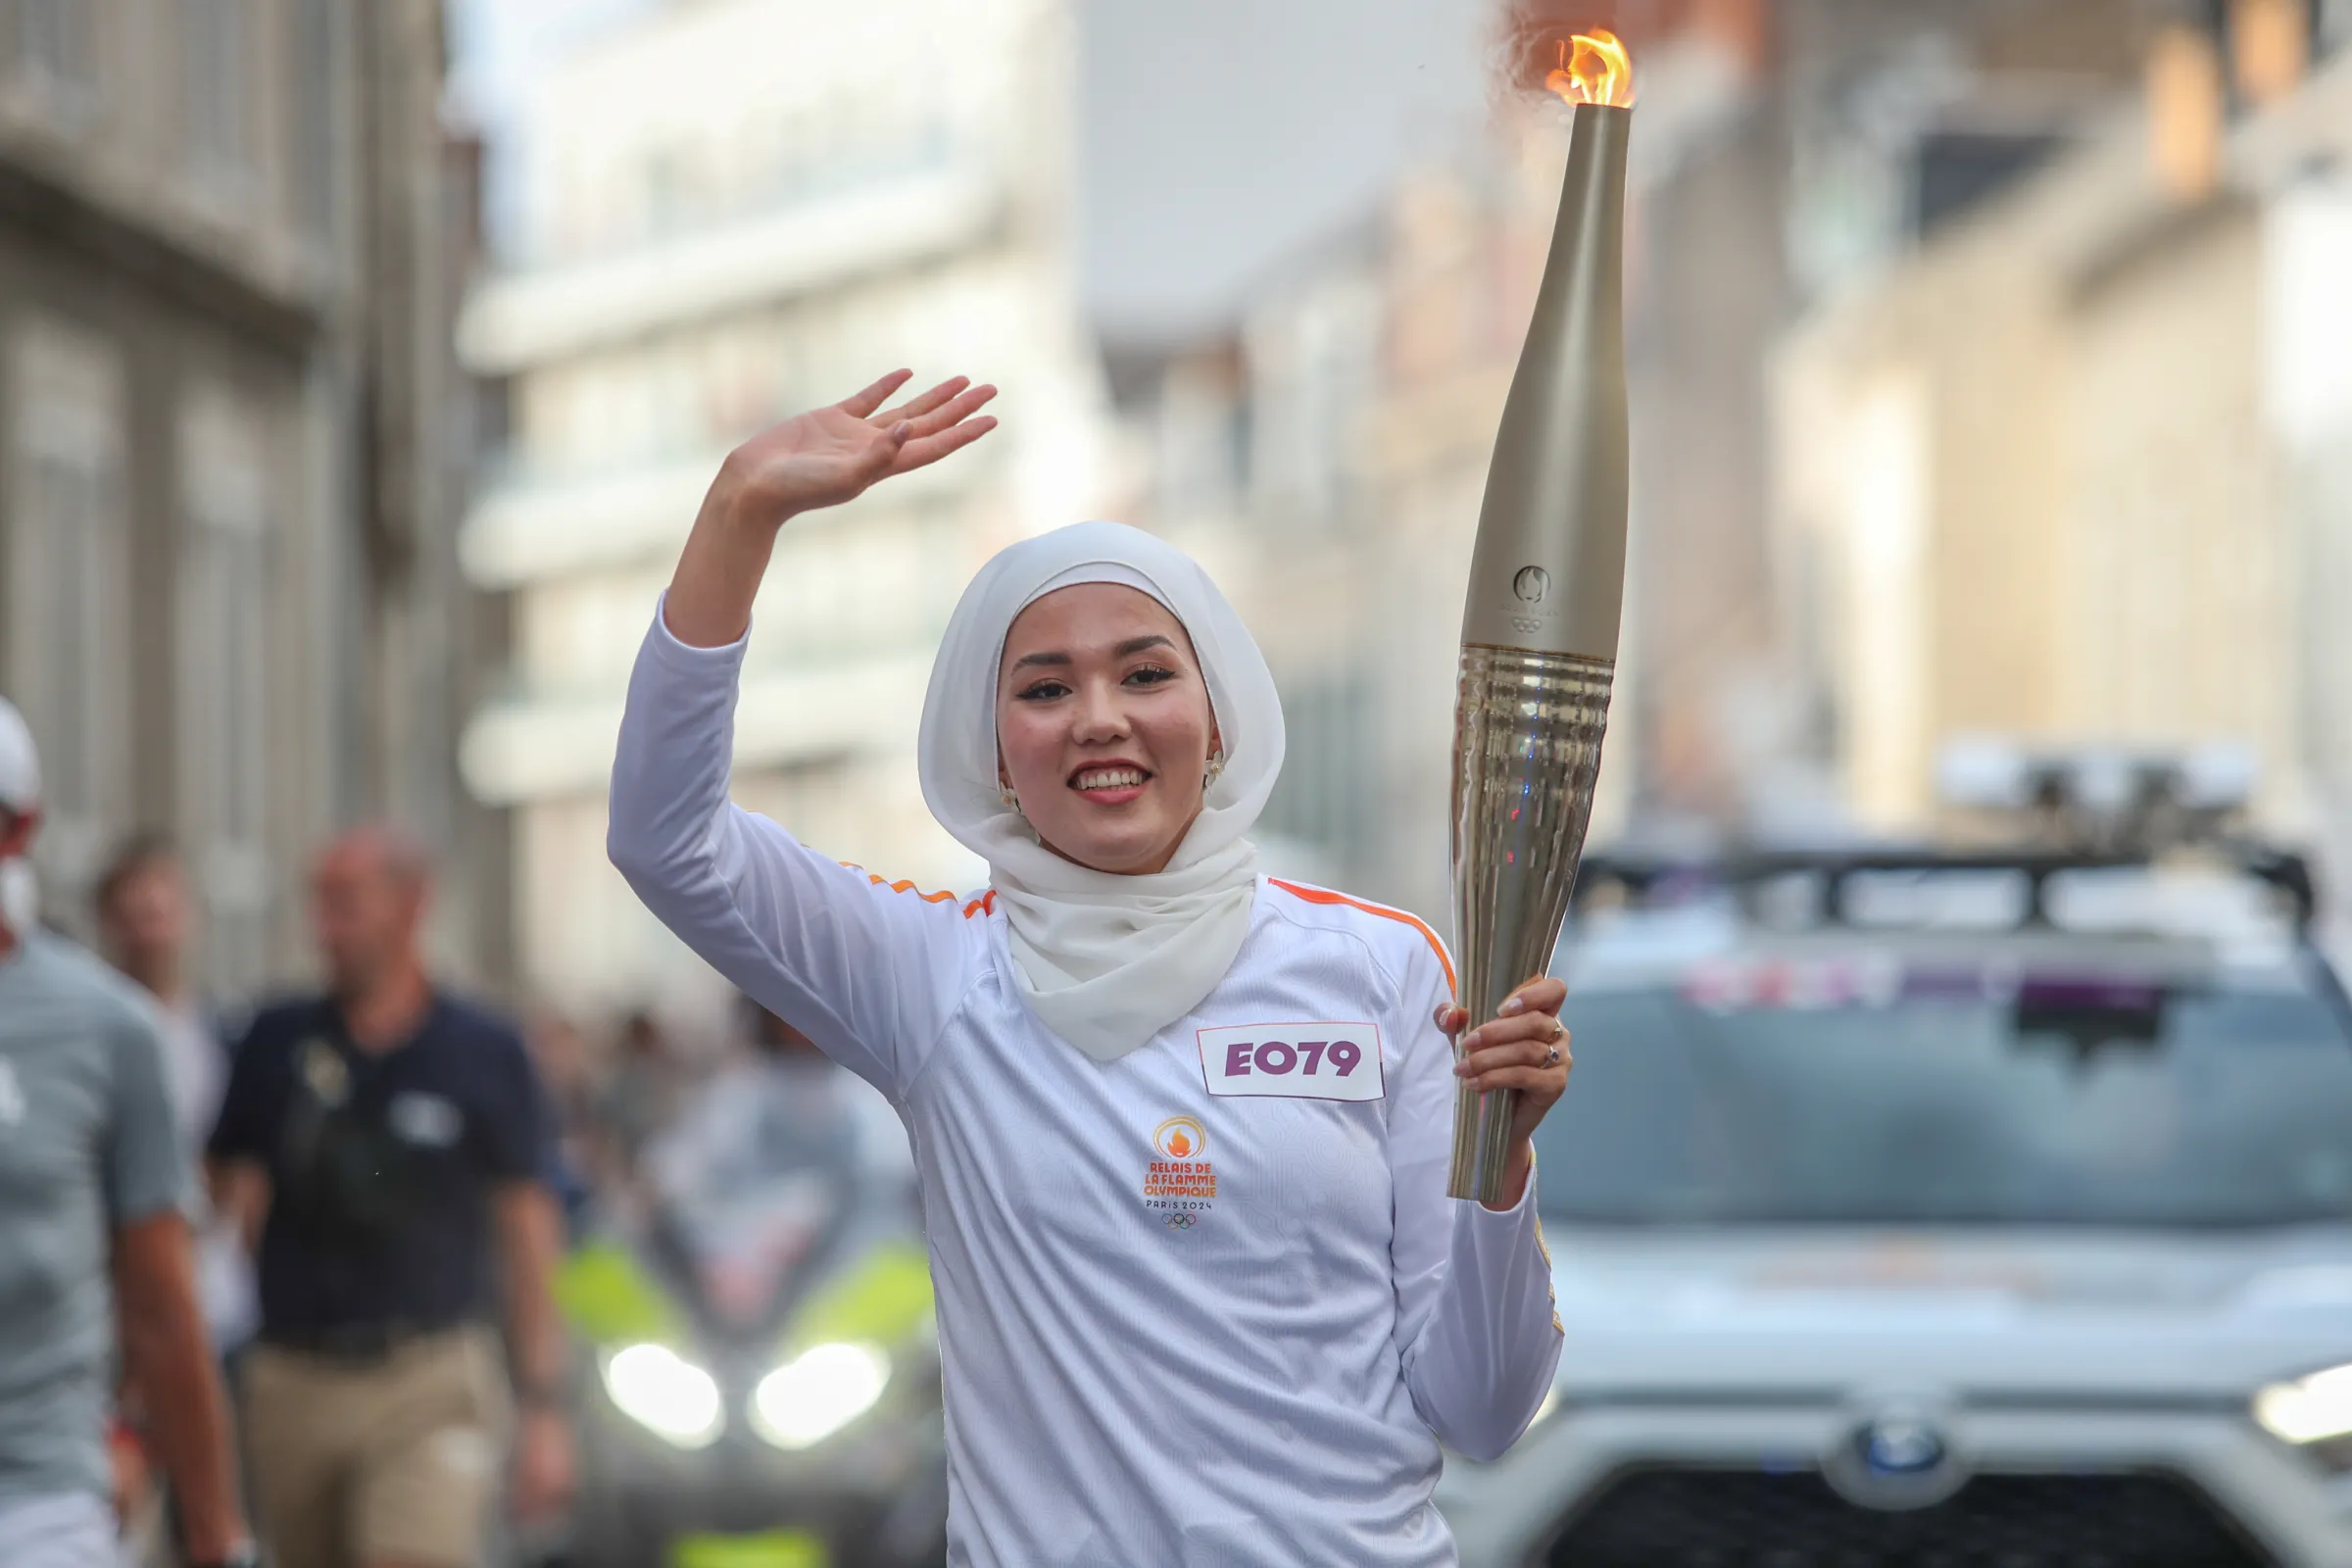 Masomah Ali Zada, chef de mission of the 2024 Olympic refugee team, carries the Olympic torch through Orleans, south of Paris, on July 10, 2024. International Olympic Committee (IOC)/
Handout via Thomson Reuters Foundation